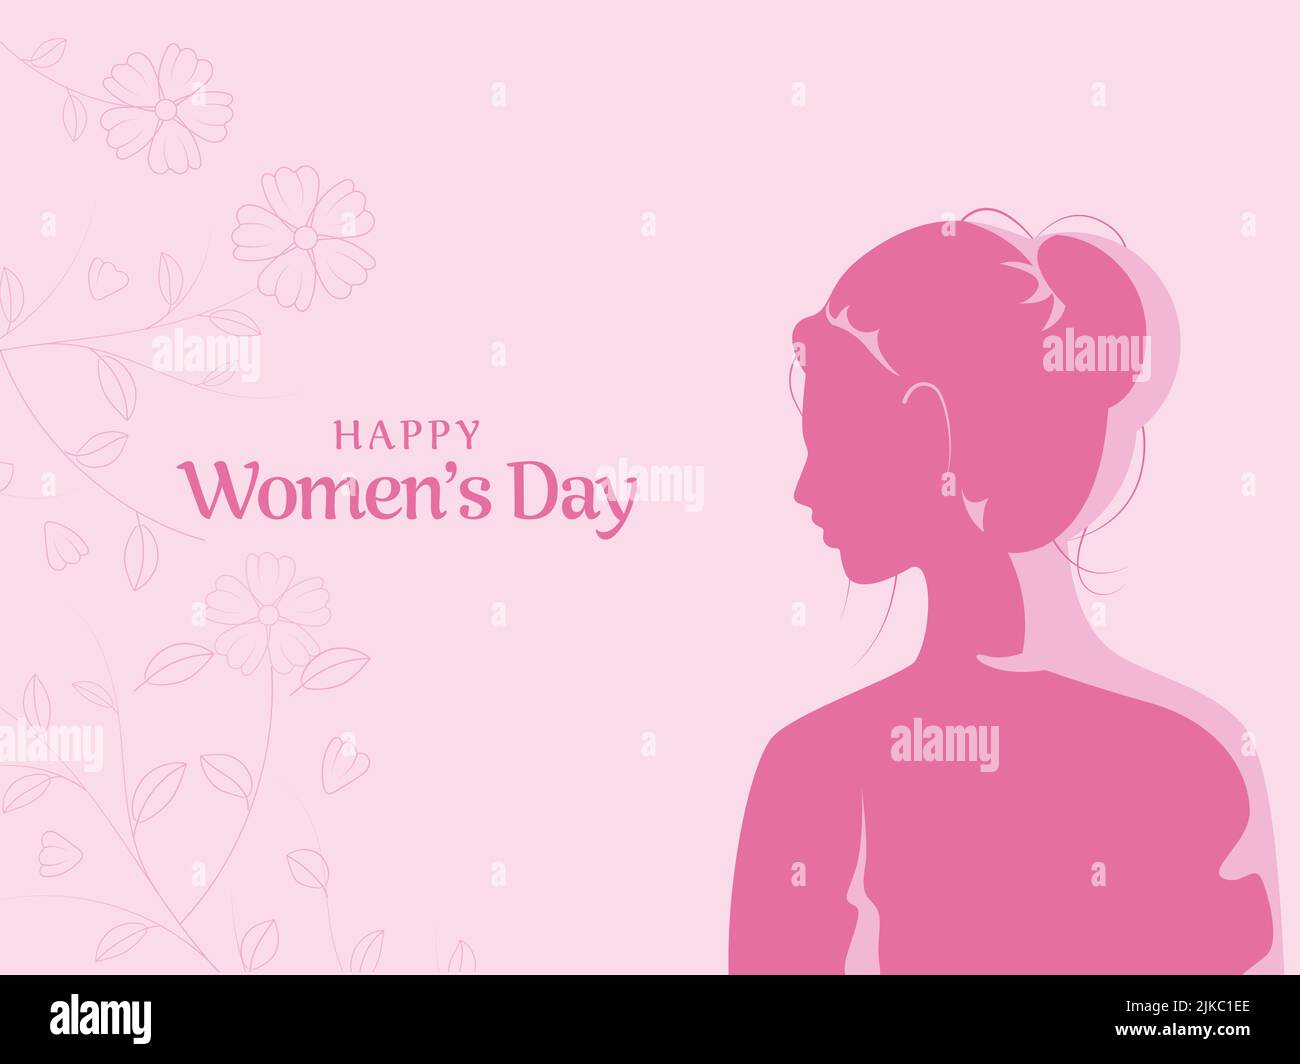 Happy Women's Day Concept With Silhouette Female And Line Art Floral Decorated On Pink Background. Stock Vector